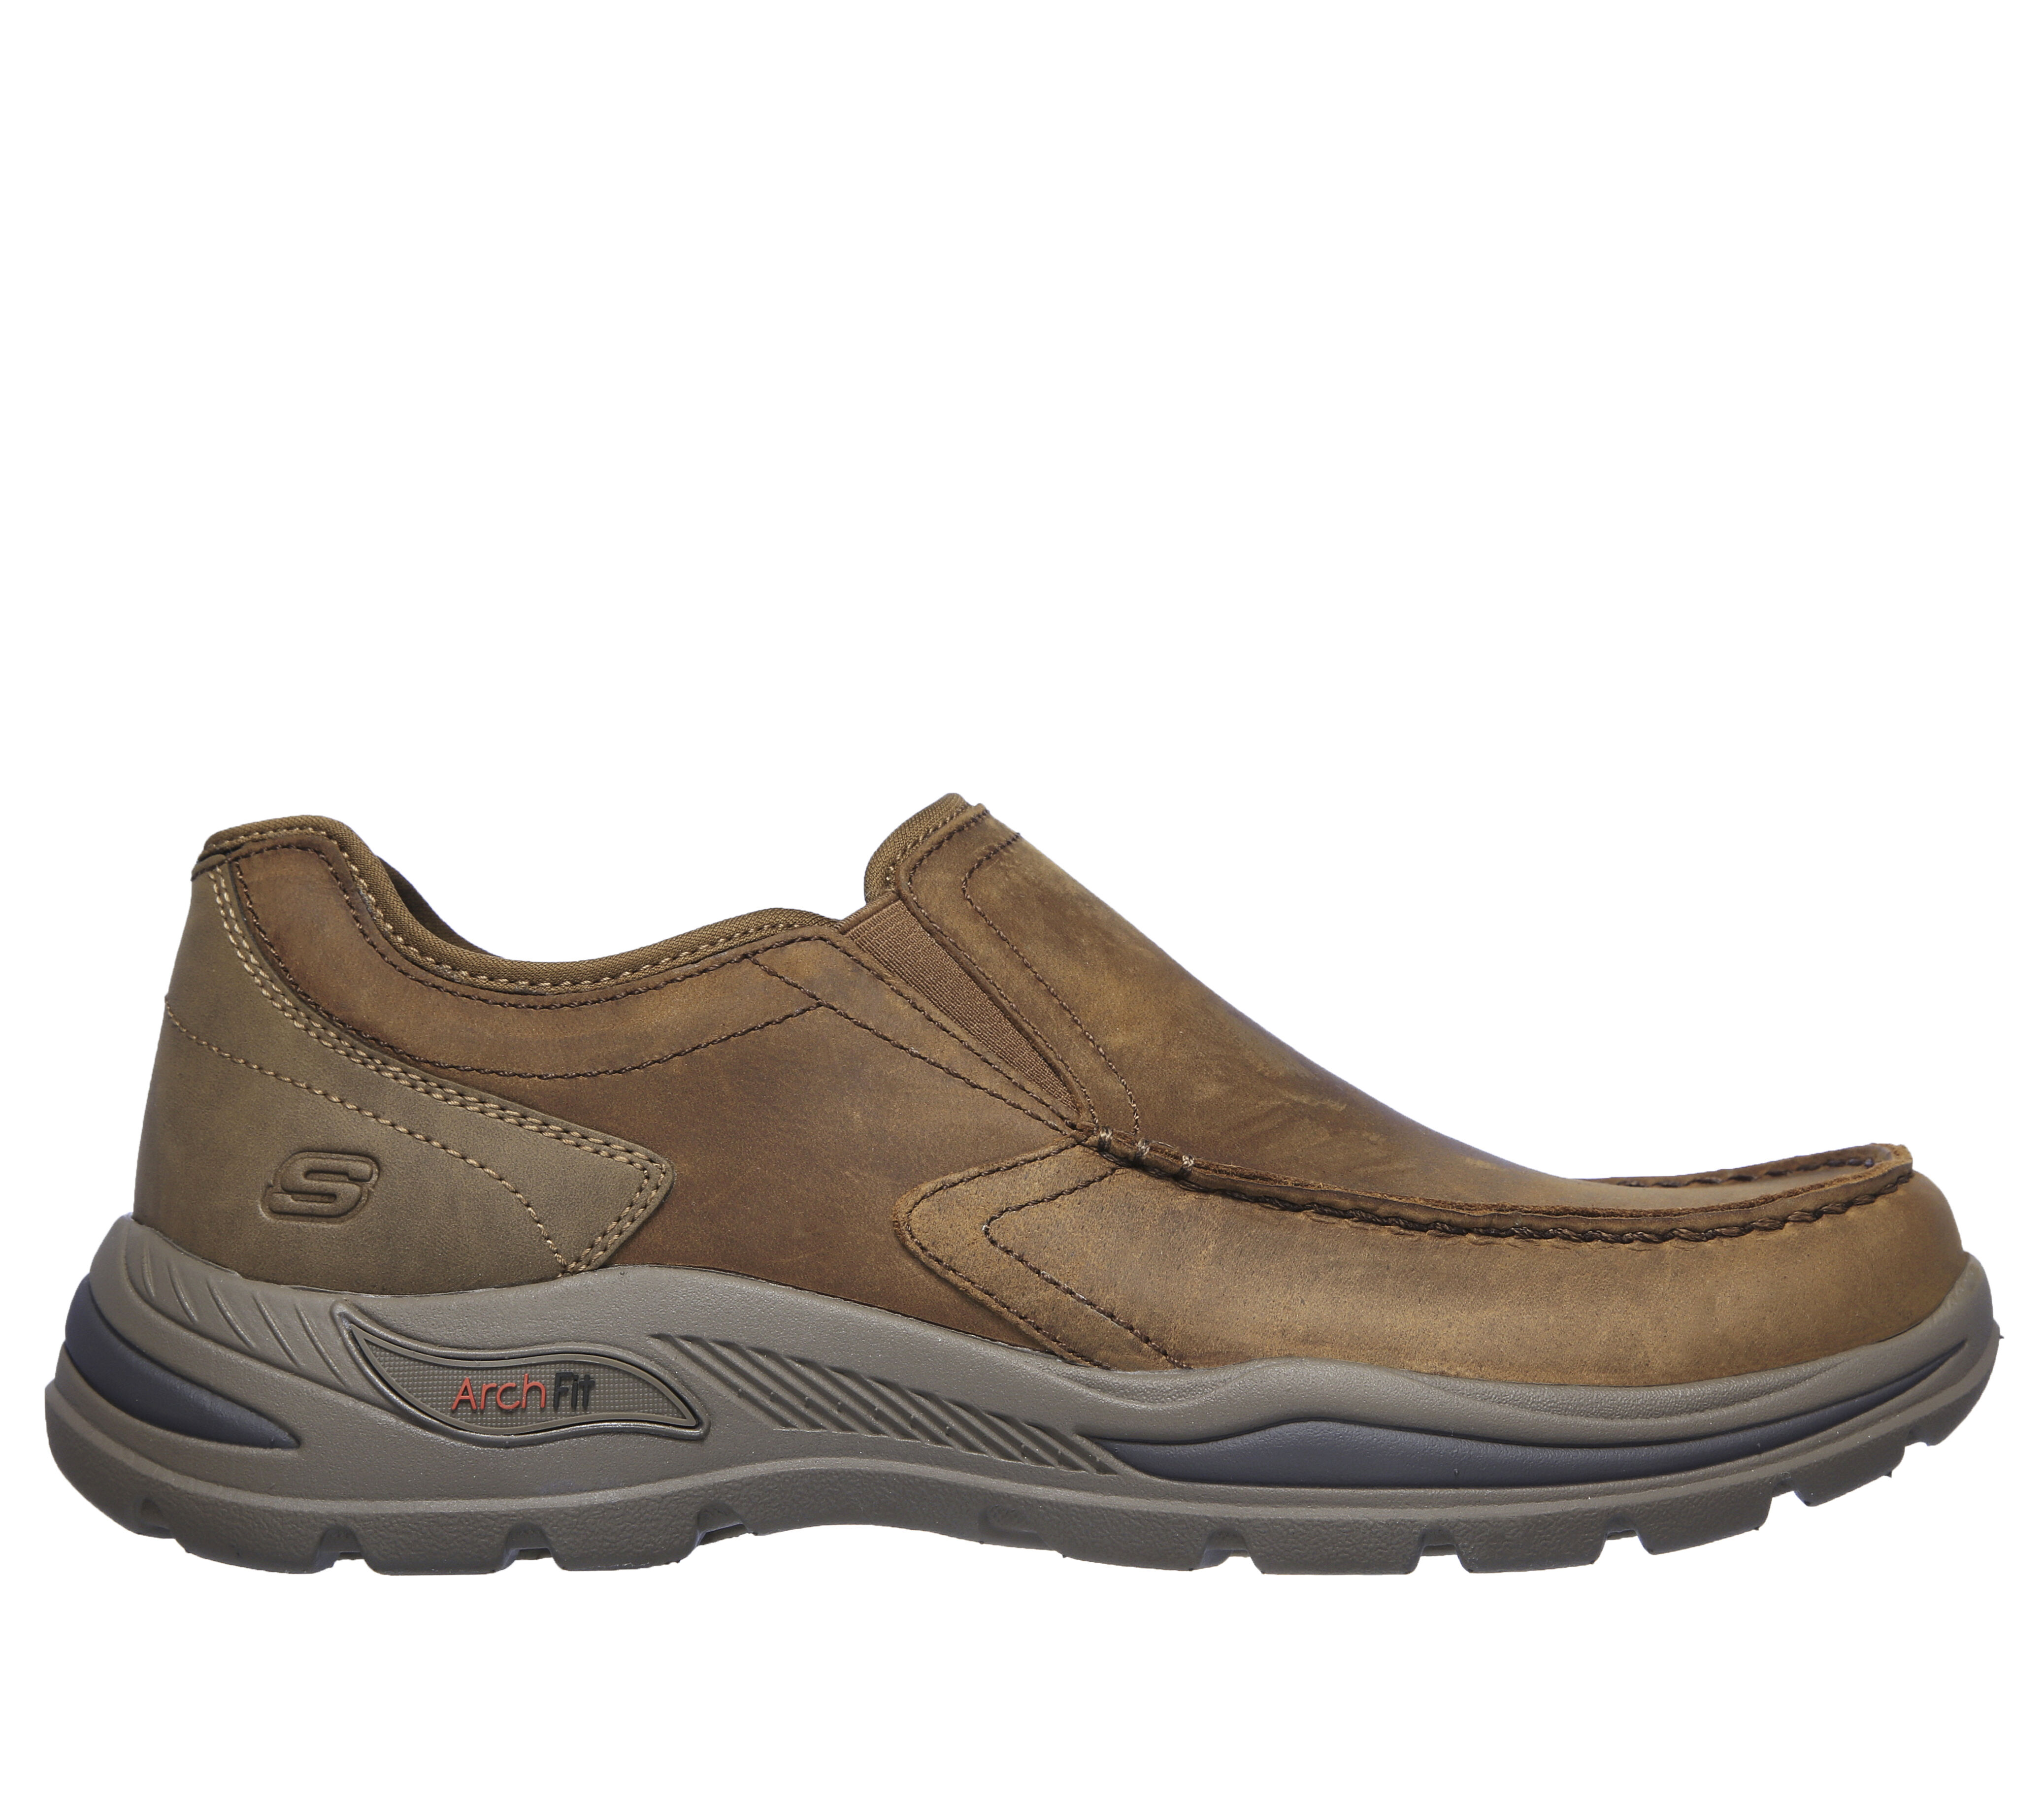 sketchers mens leather shoes